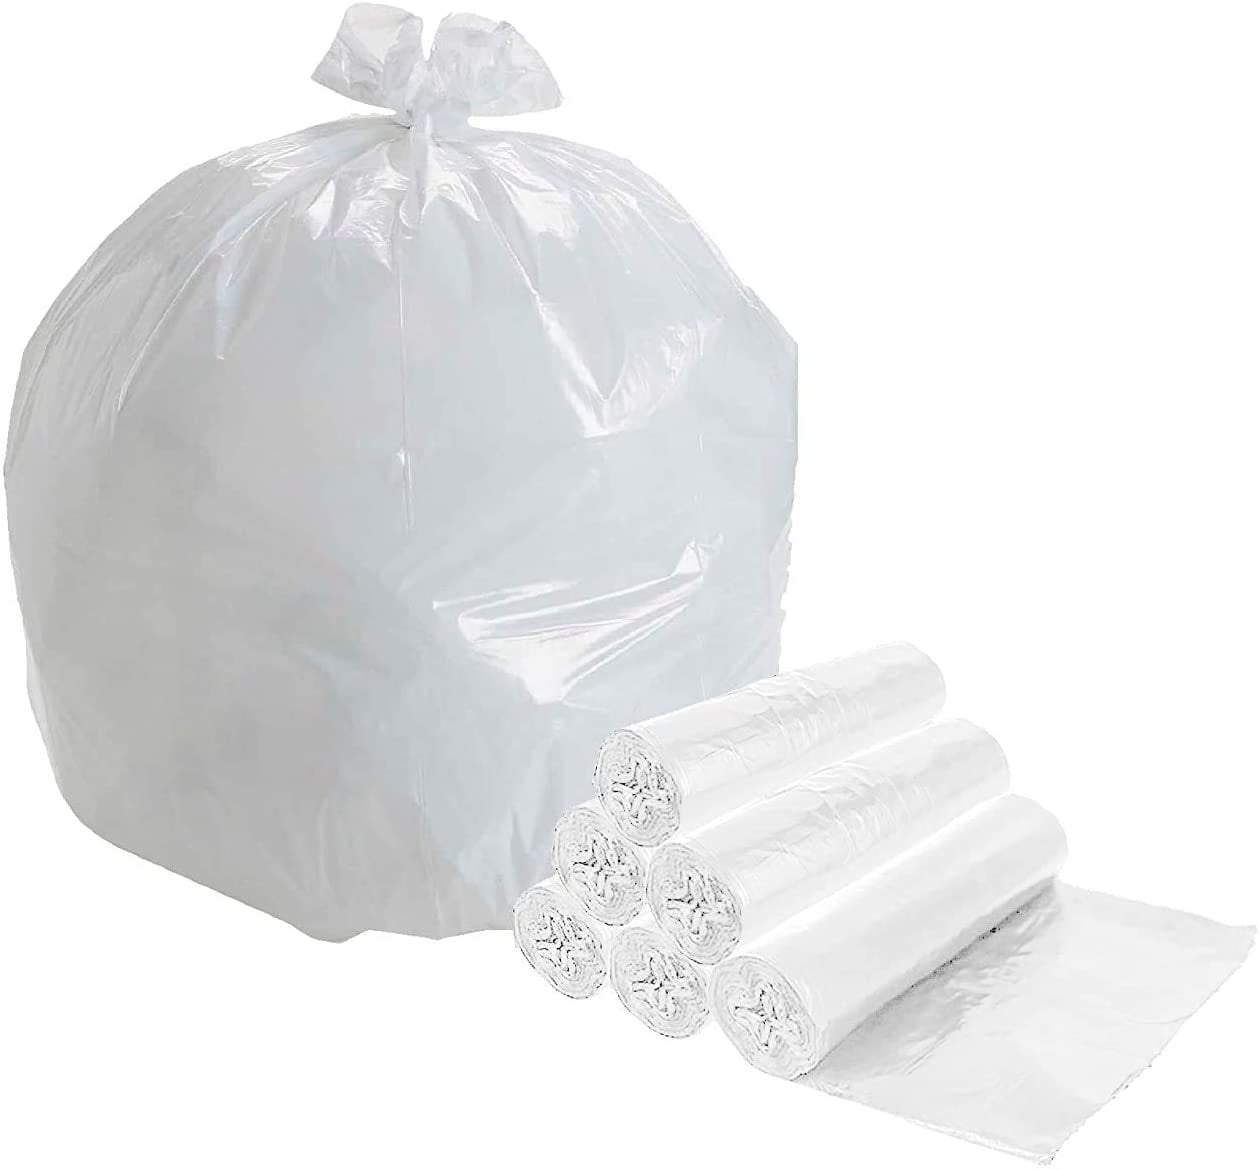 7 Gallon Trash Bags 200-Pack Clear Garbage Bags 20" x 22" Waste Basket Bags 